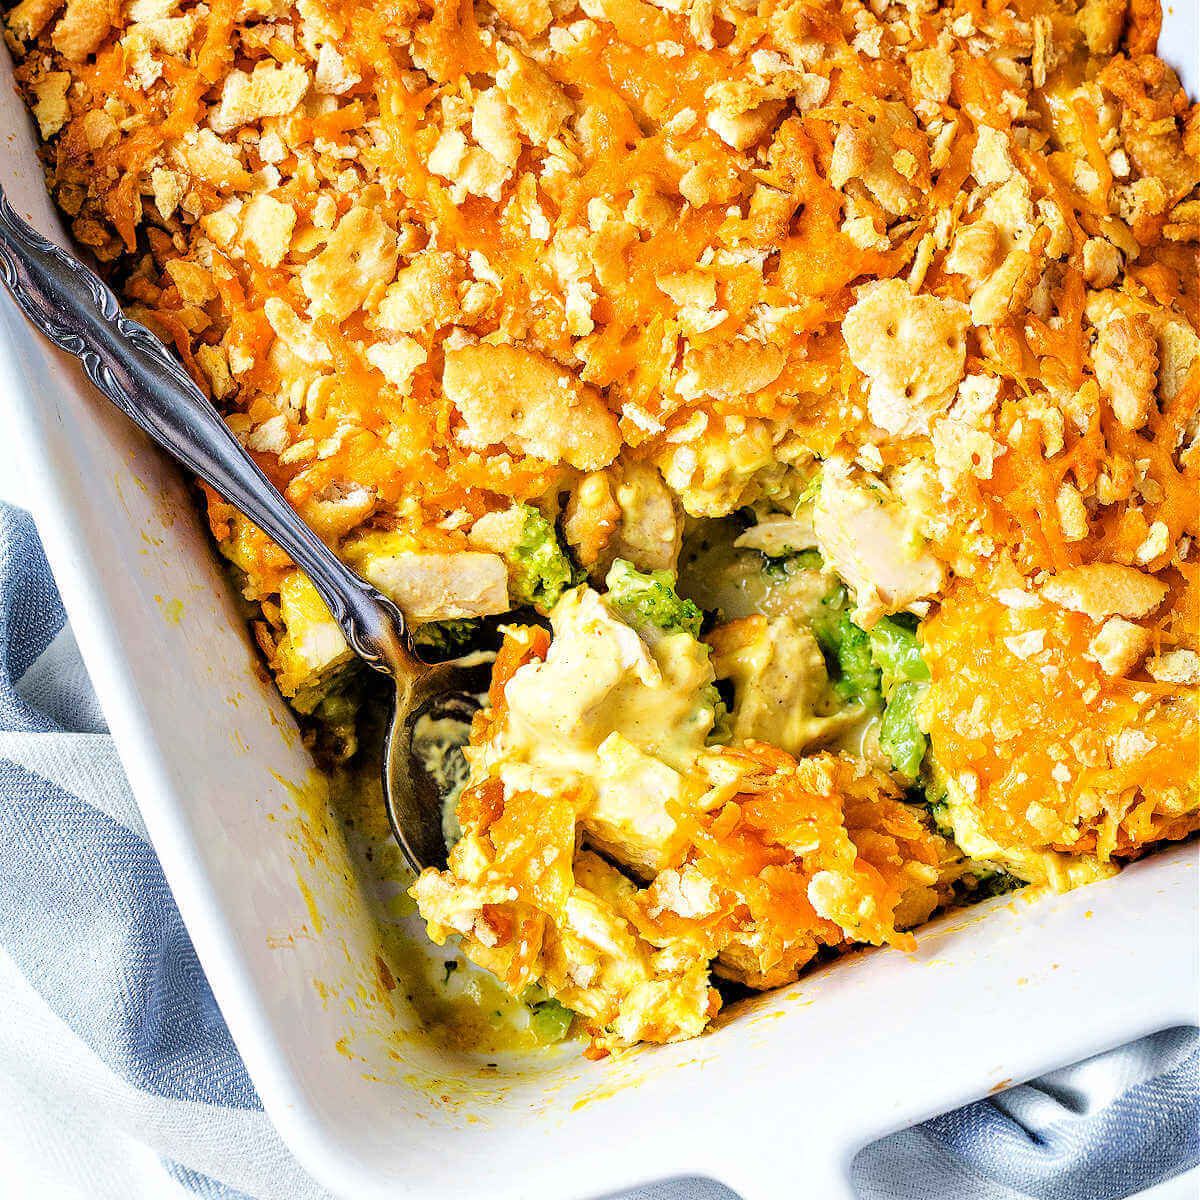 Chicken Broccoli Casserole with Cheesy Crumb Topping